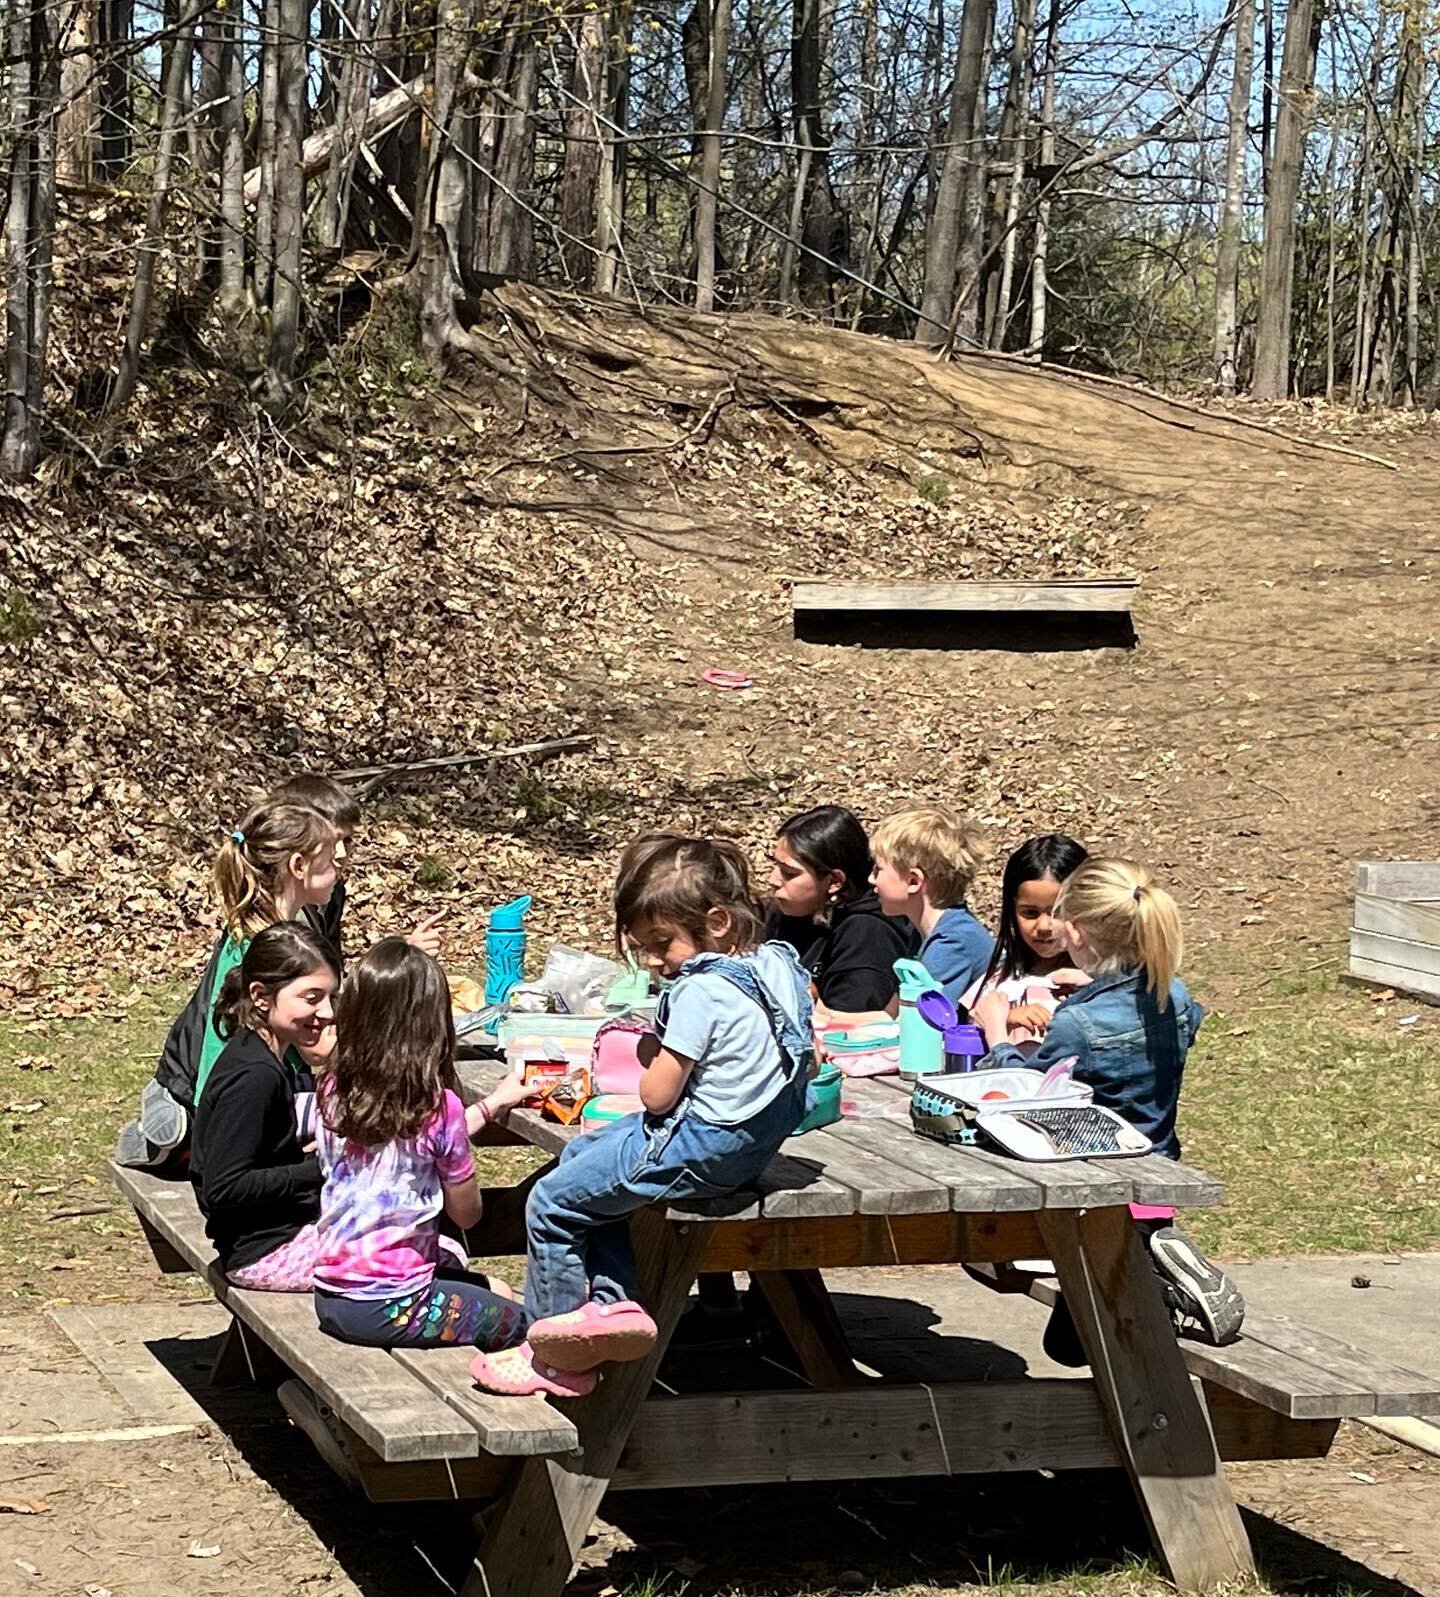 First day of having our camp lunch outside at the picnic tables.Hooray!
#aprilbreakcamp #springhassprung #artcamp #manchestervt #outsidefun